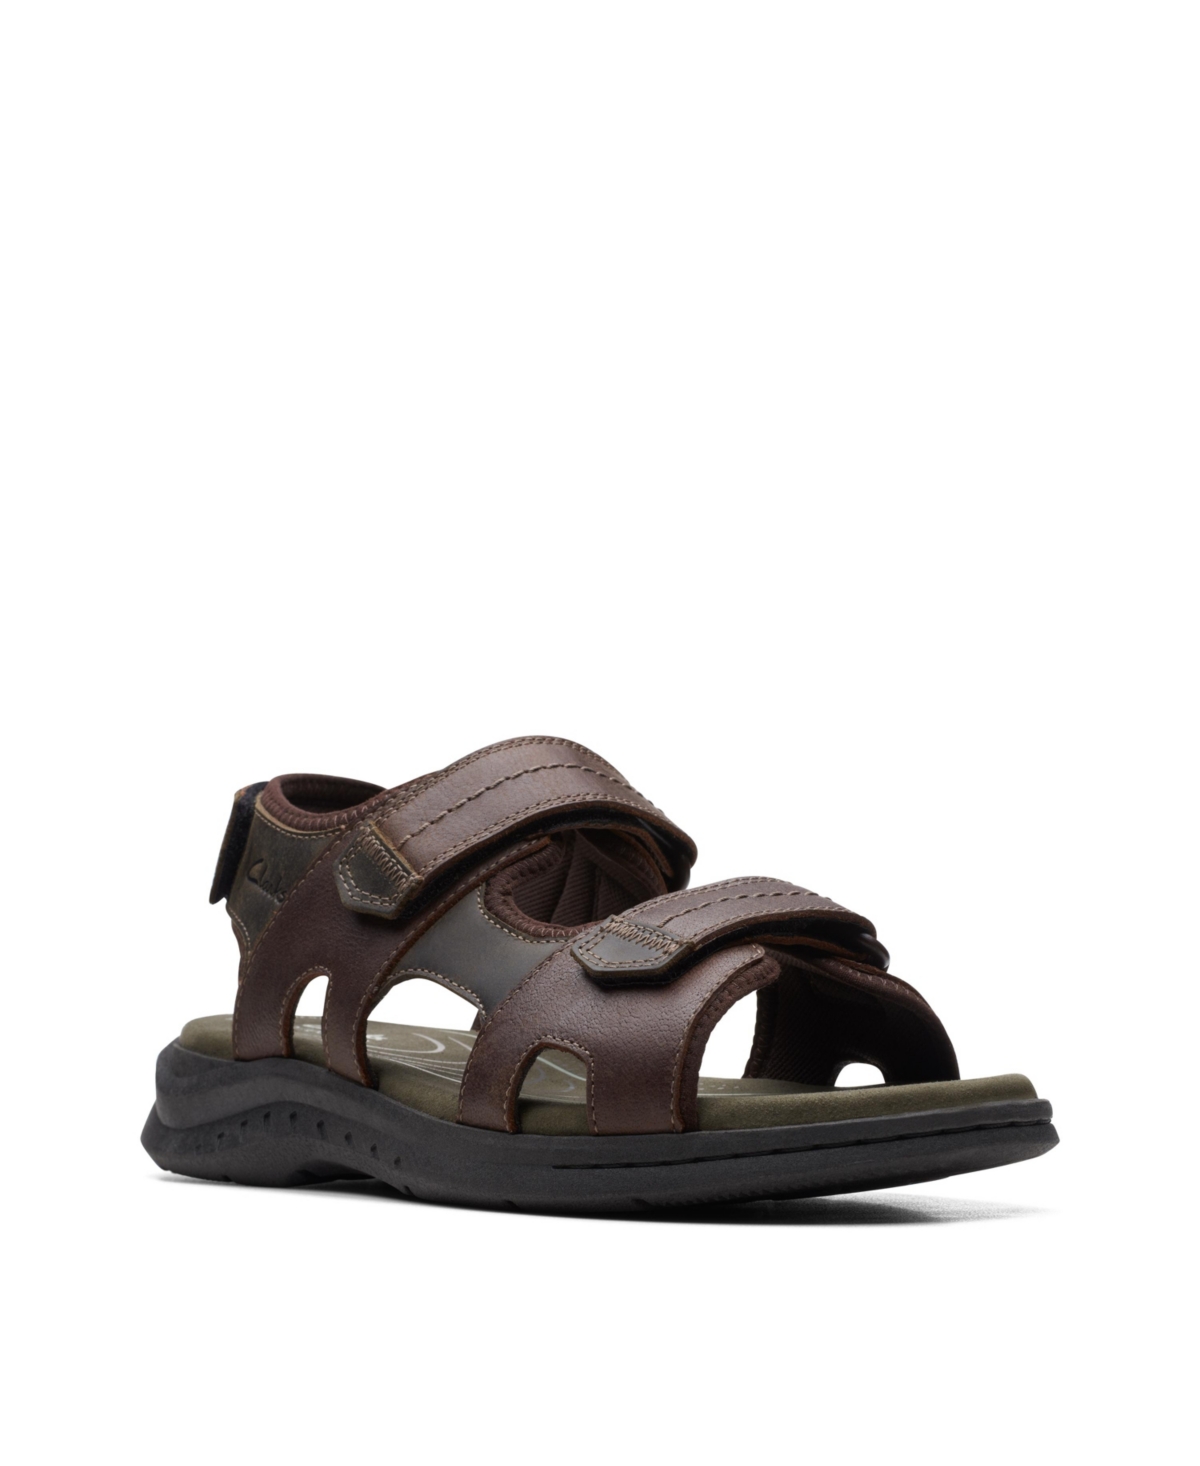 Clarks Men's Walkford Casual Walk Sandals In Tan Leather